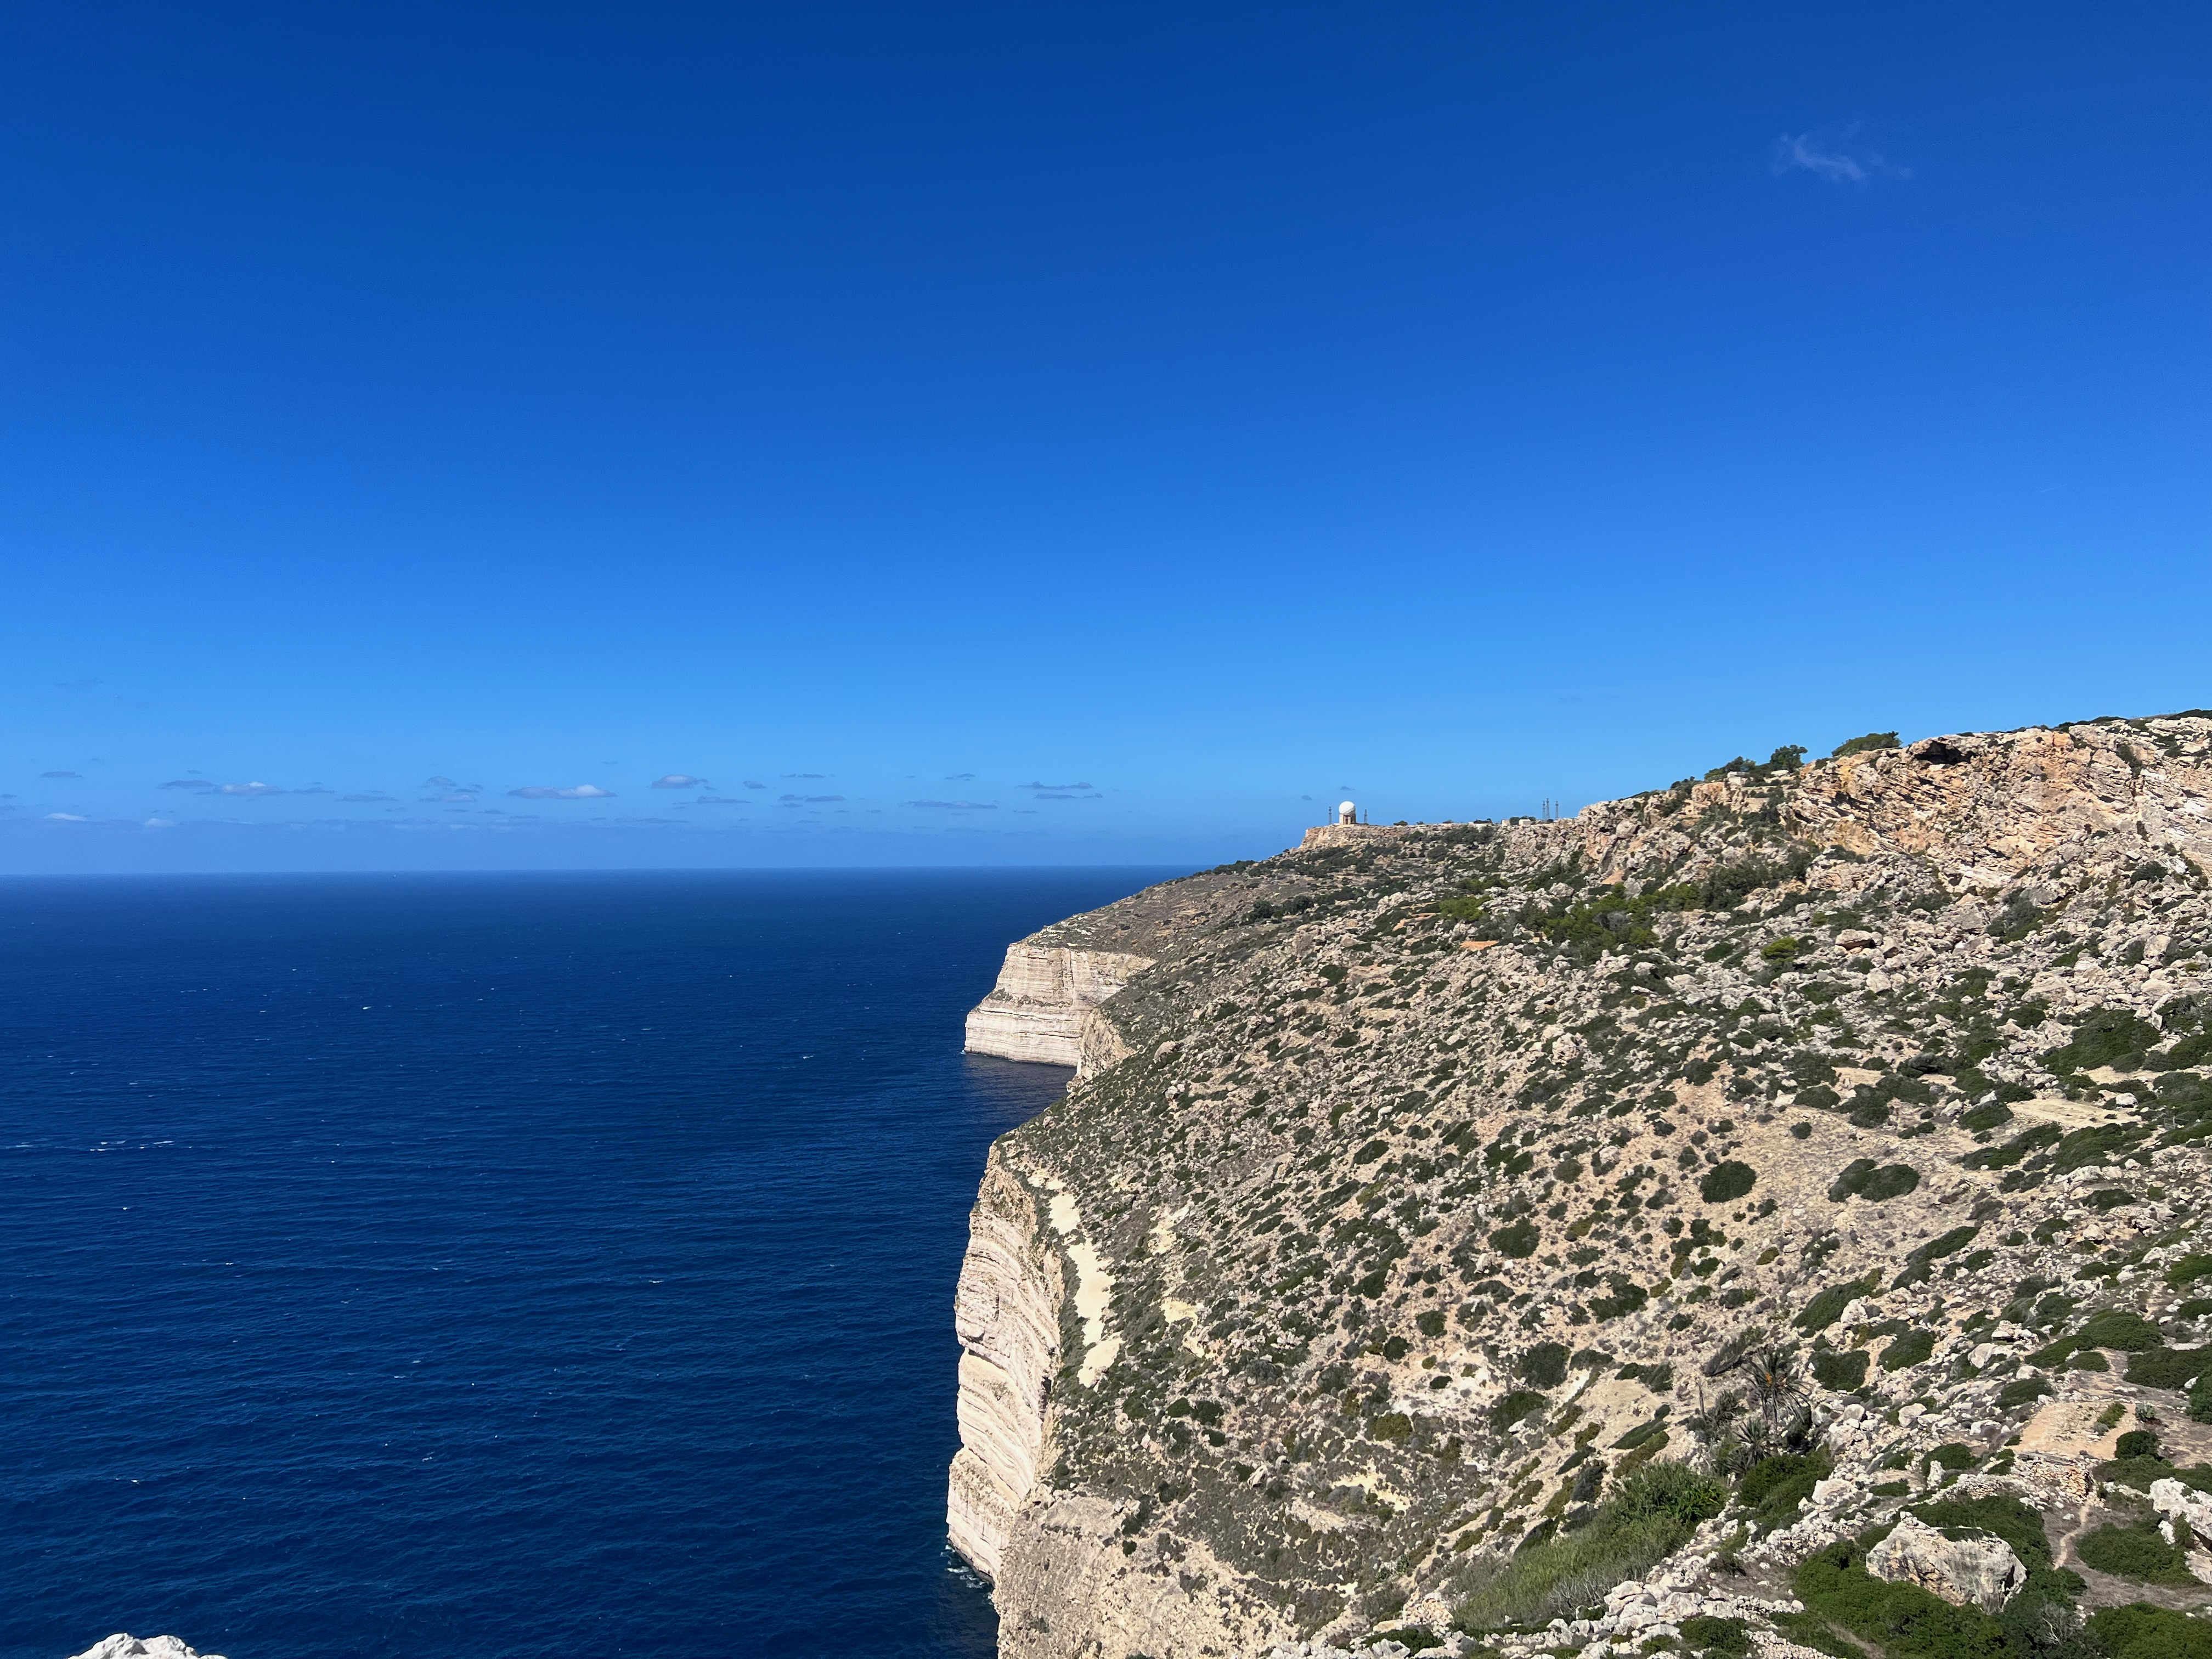 View of the Dingli Cliffs